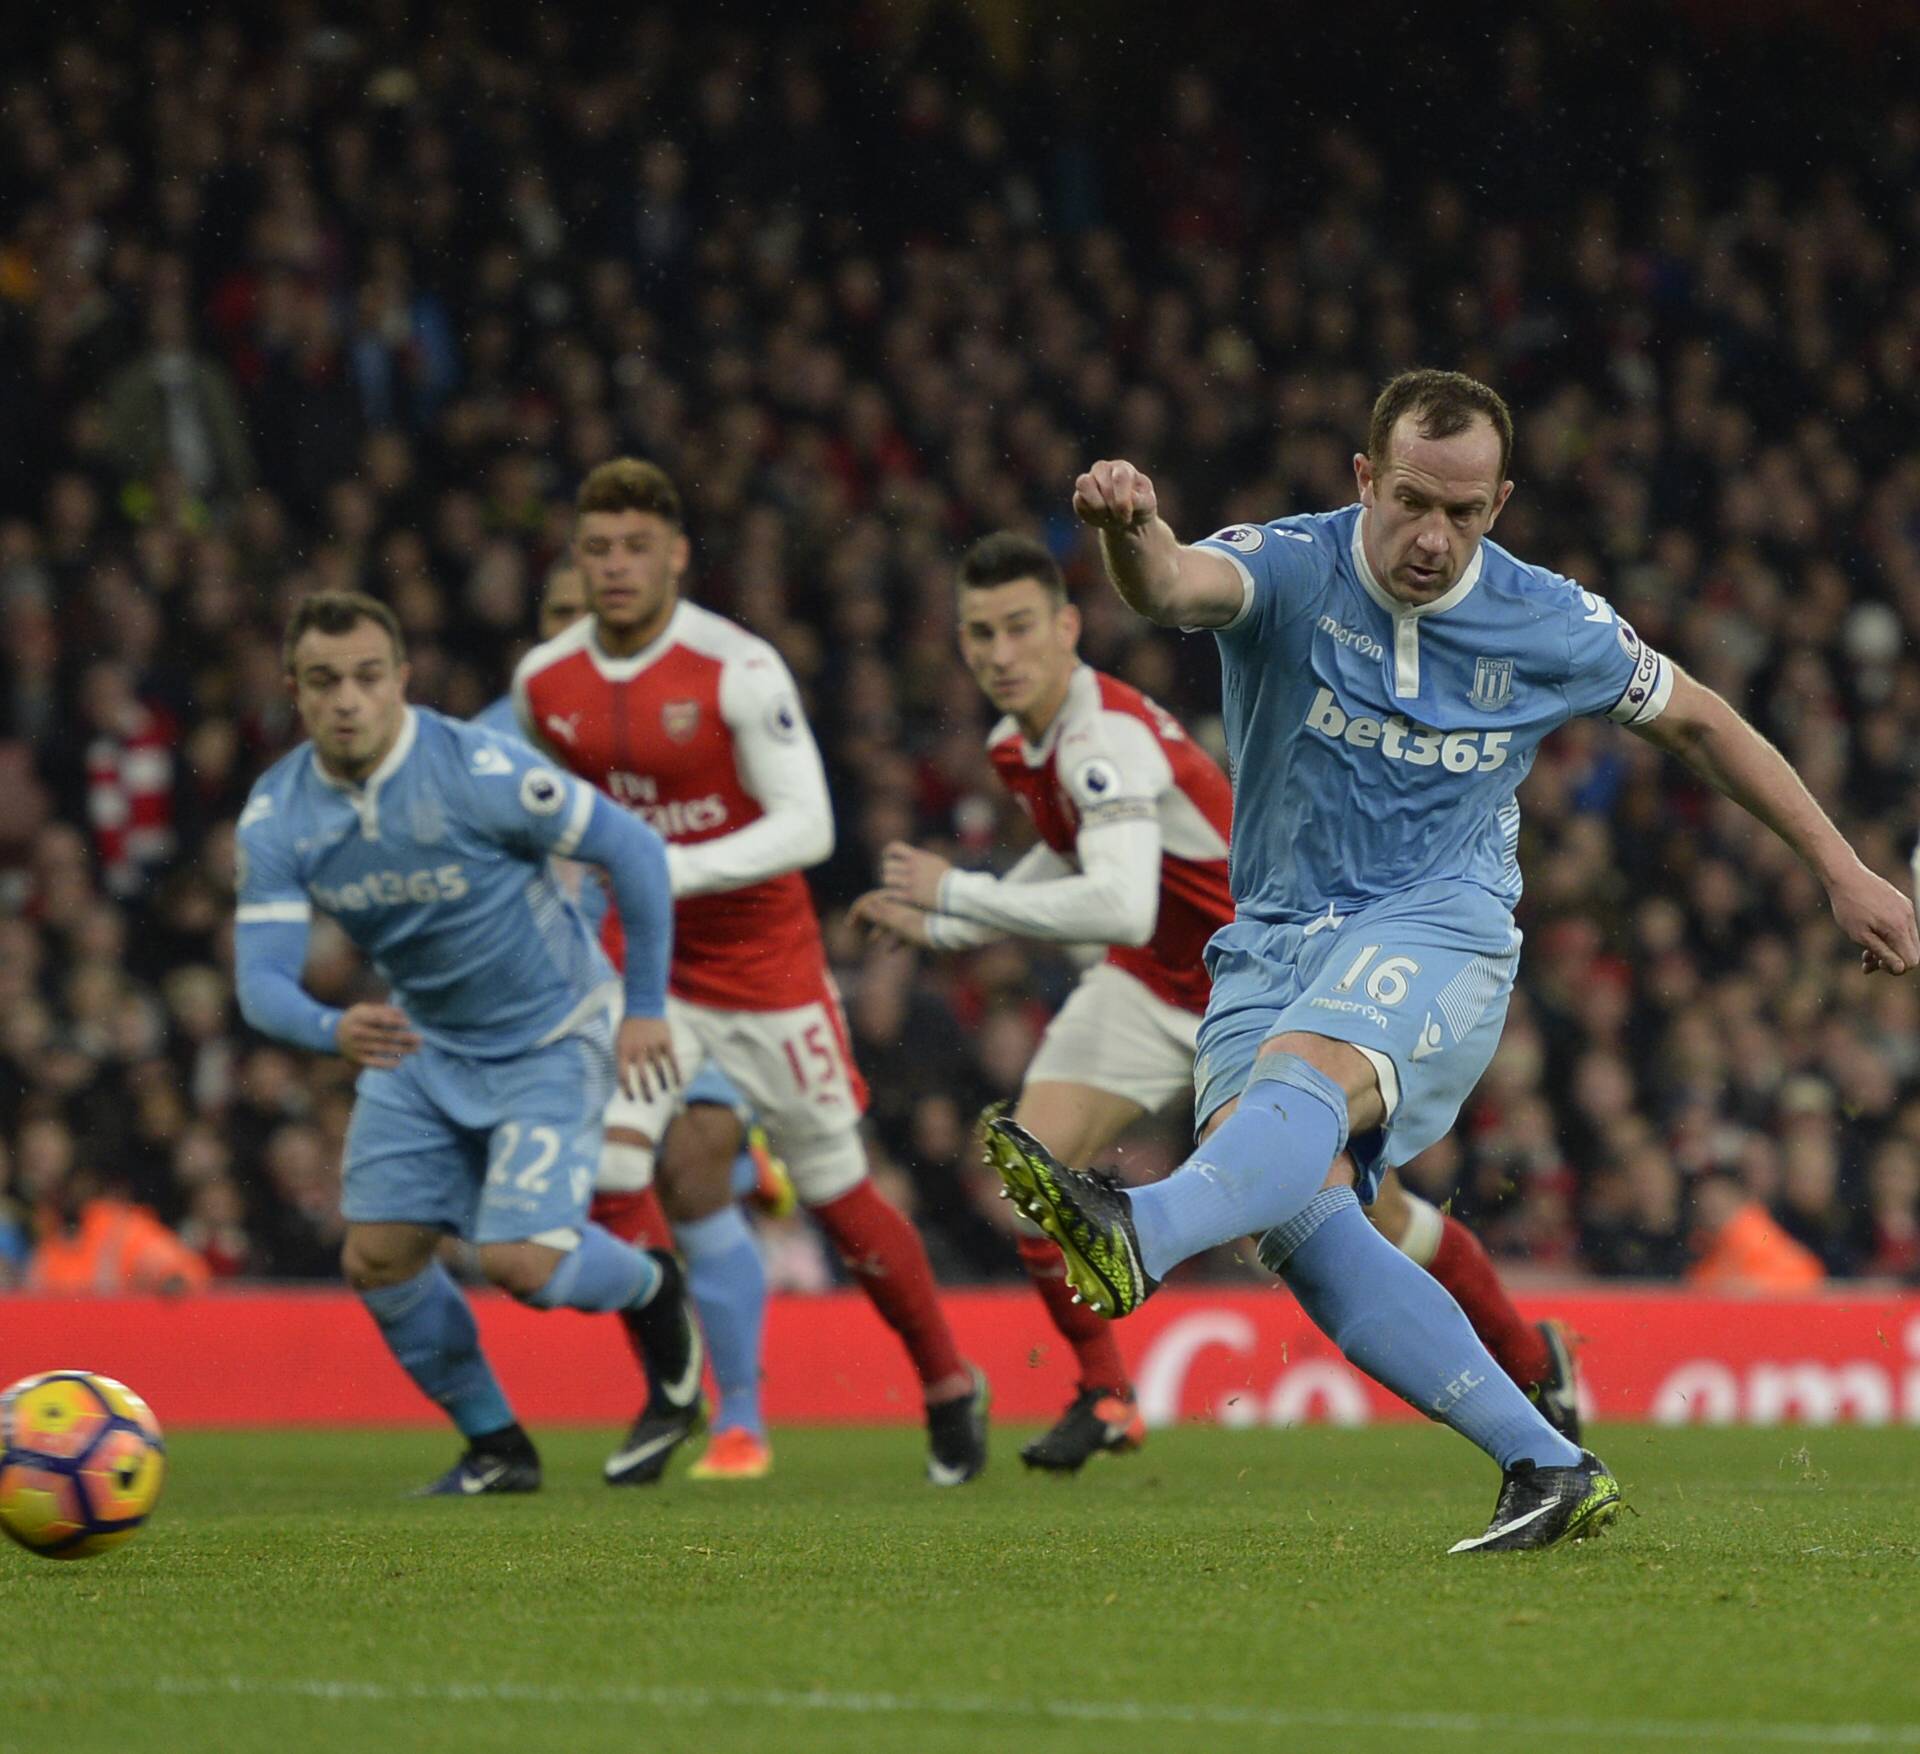 Stoke City's Charlie Adam scores their first goal from the penalty spot